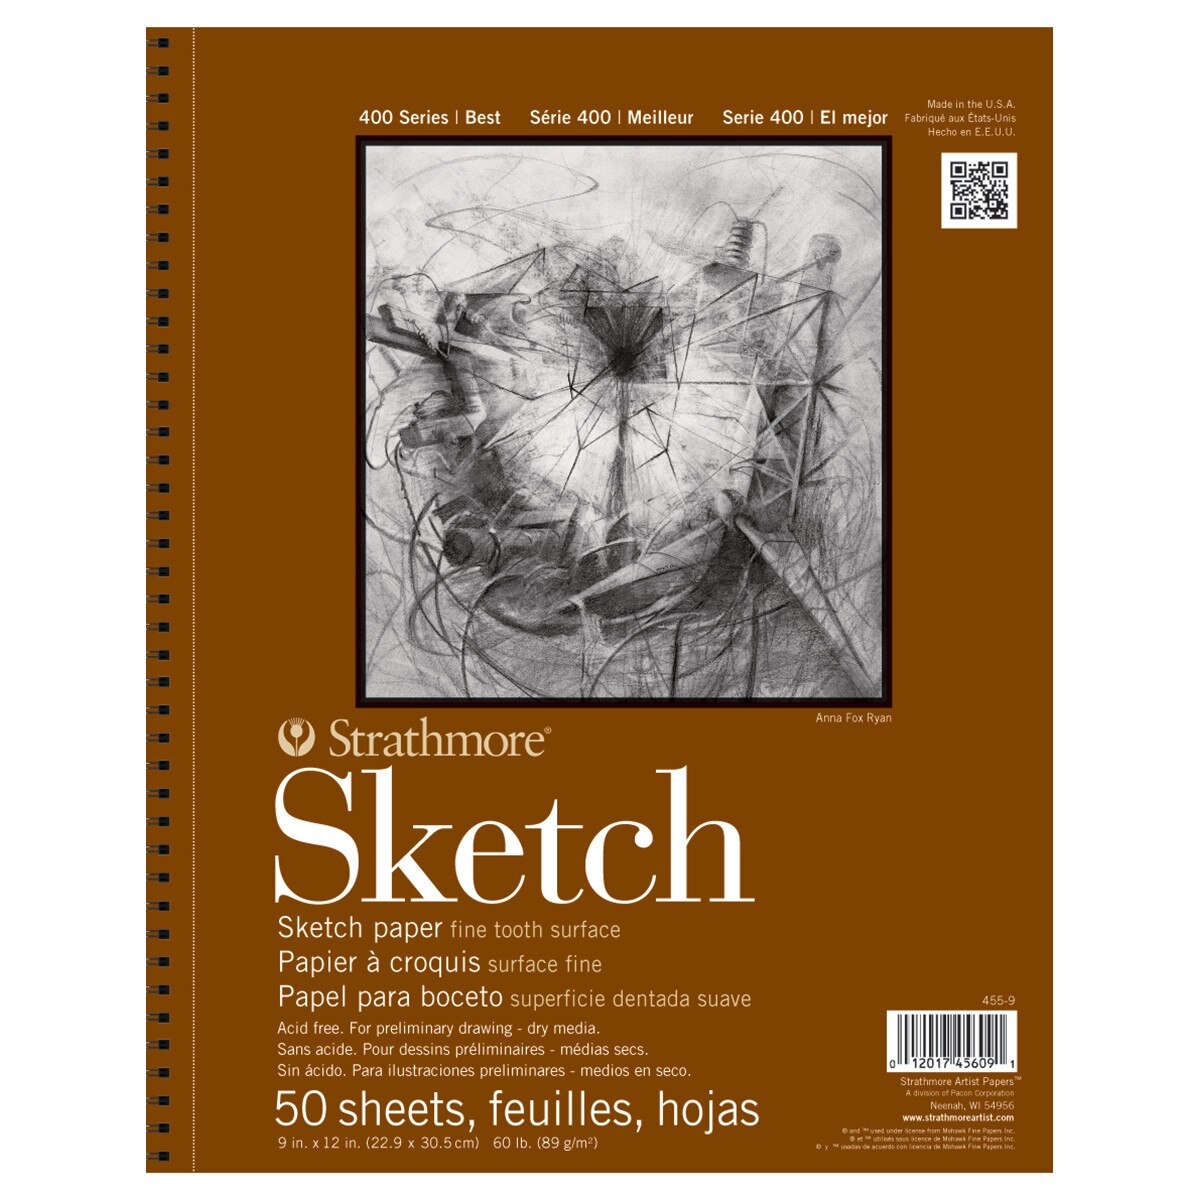 Strathmore Sketch Paper Pad, 400 Series, 9" x 12, 50 Sheets